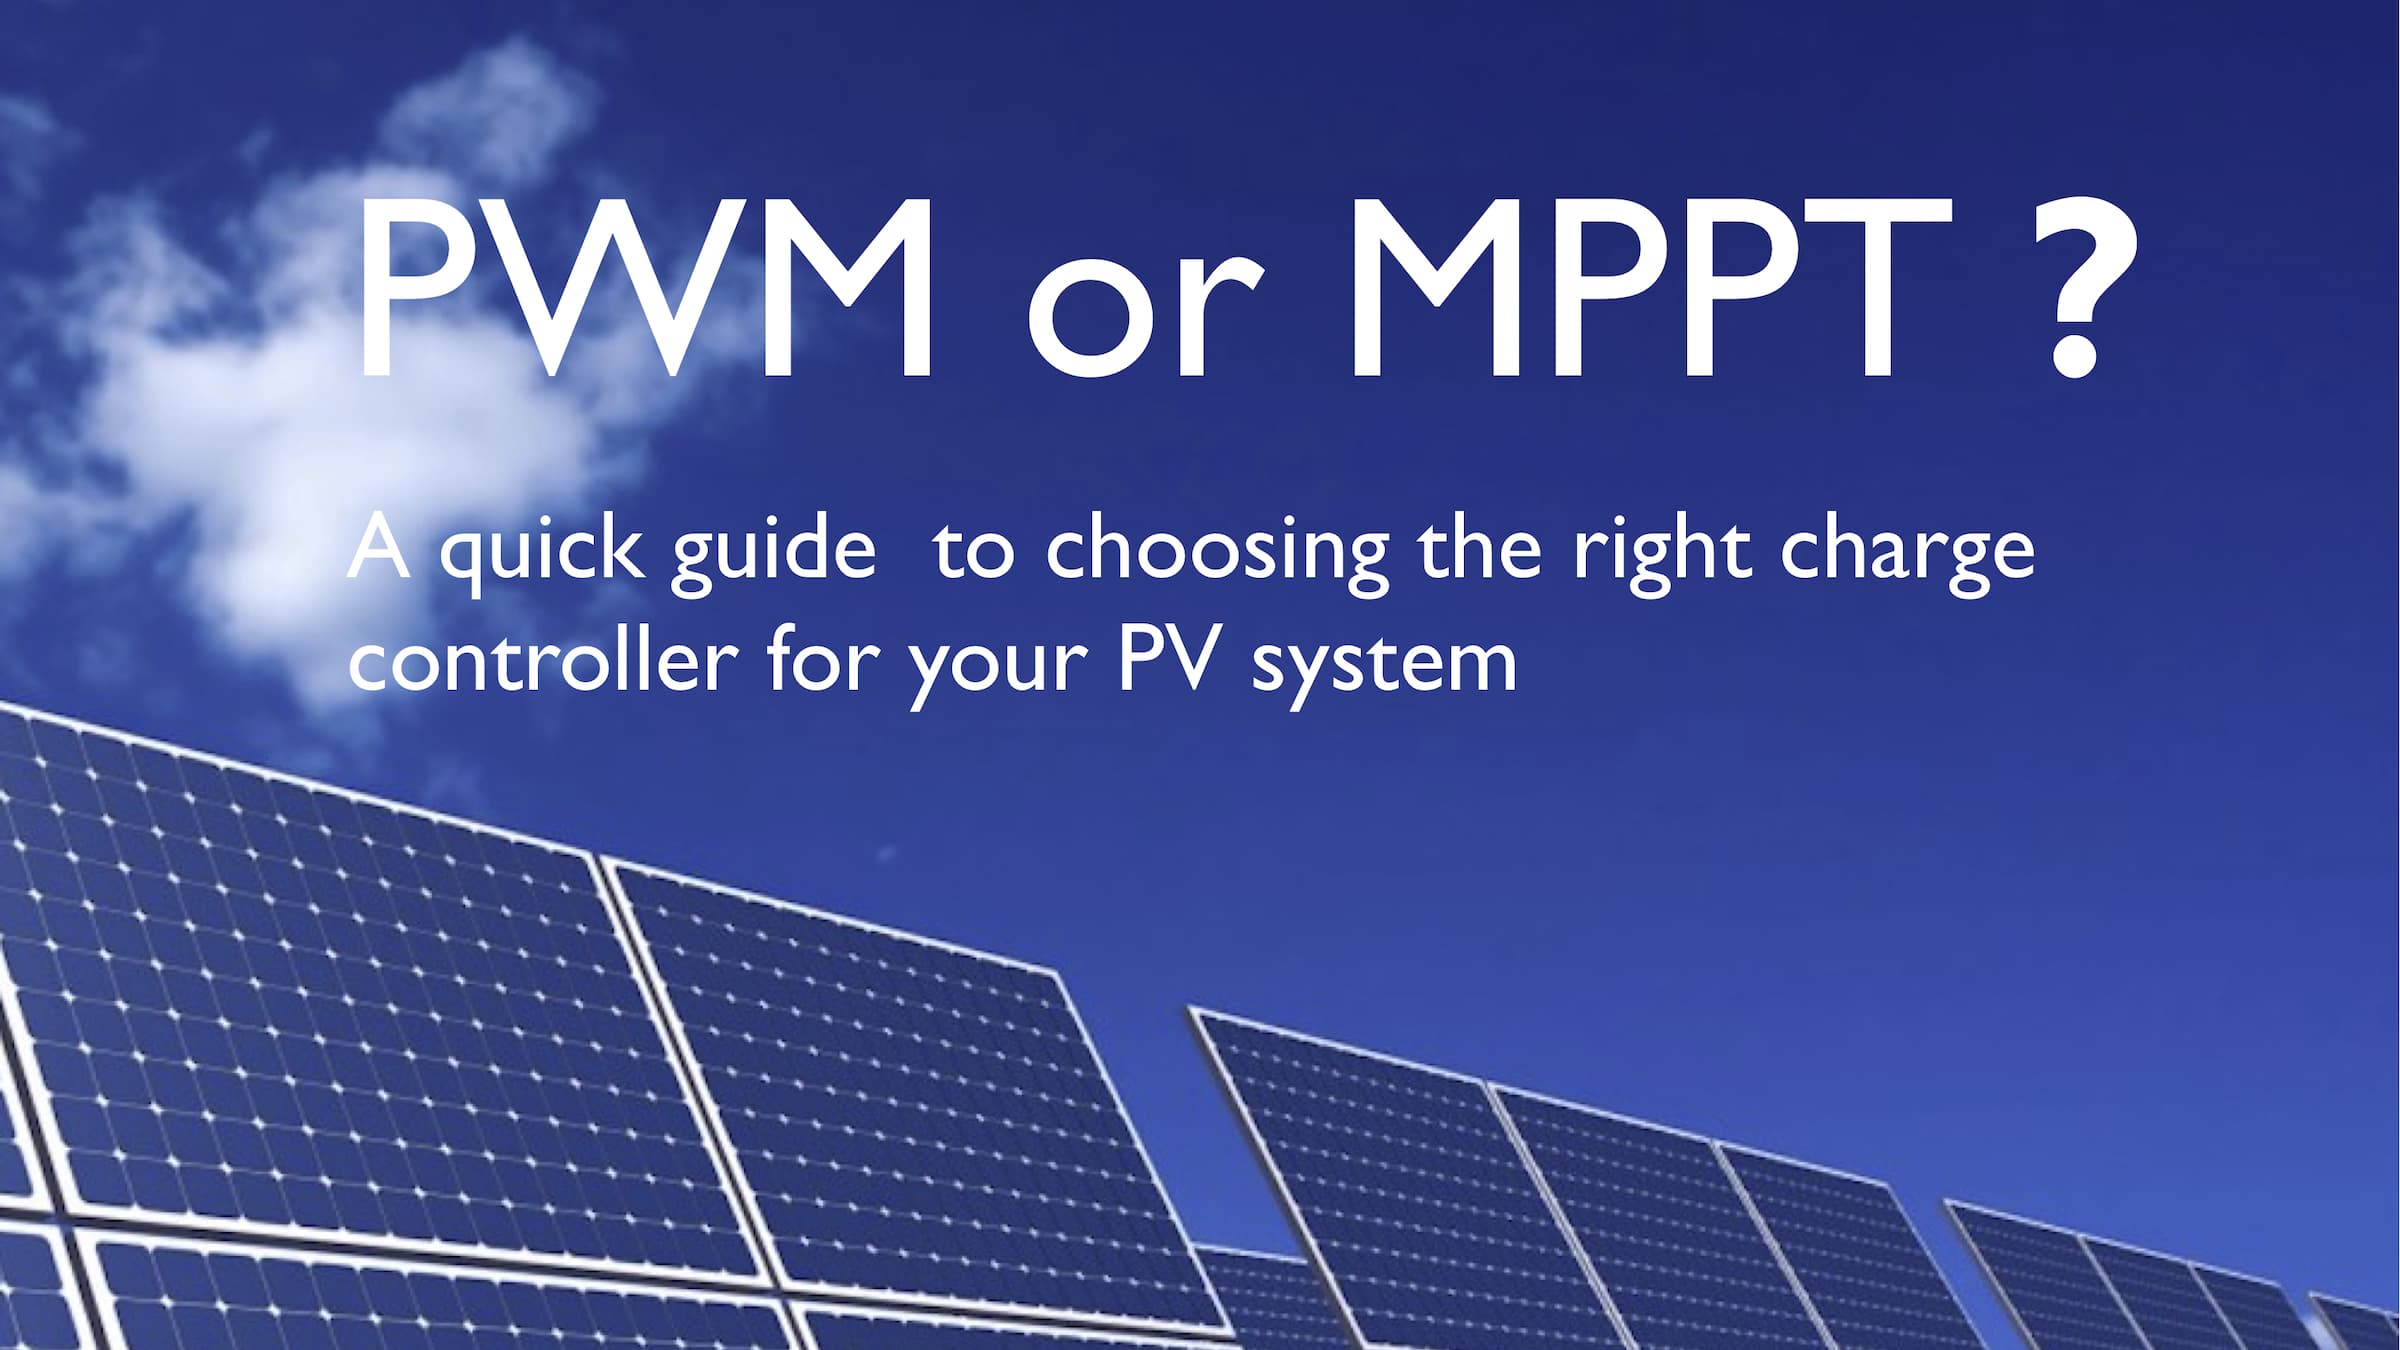 How to choose solar off-grid controller